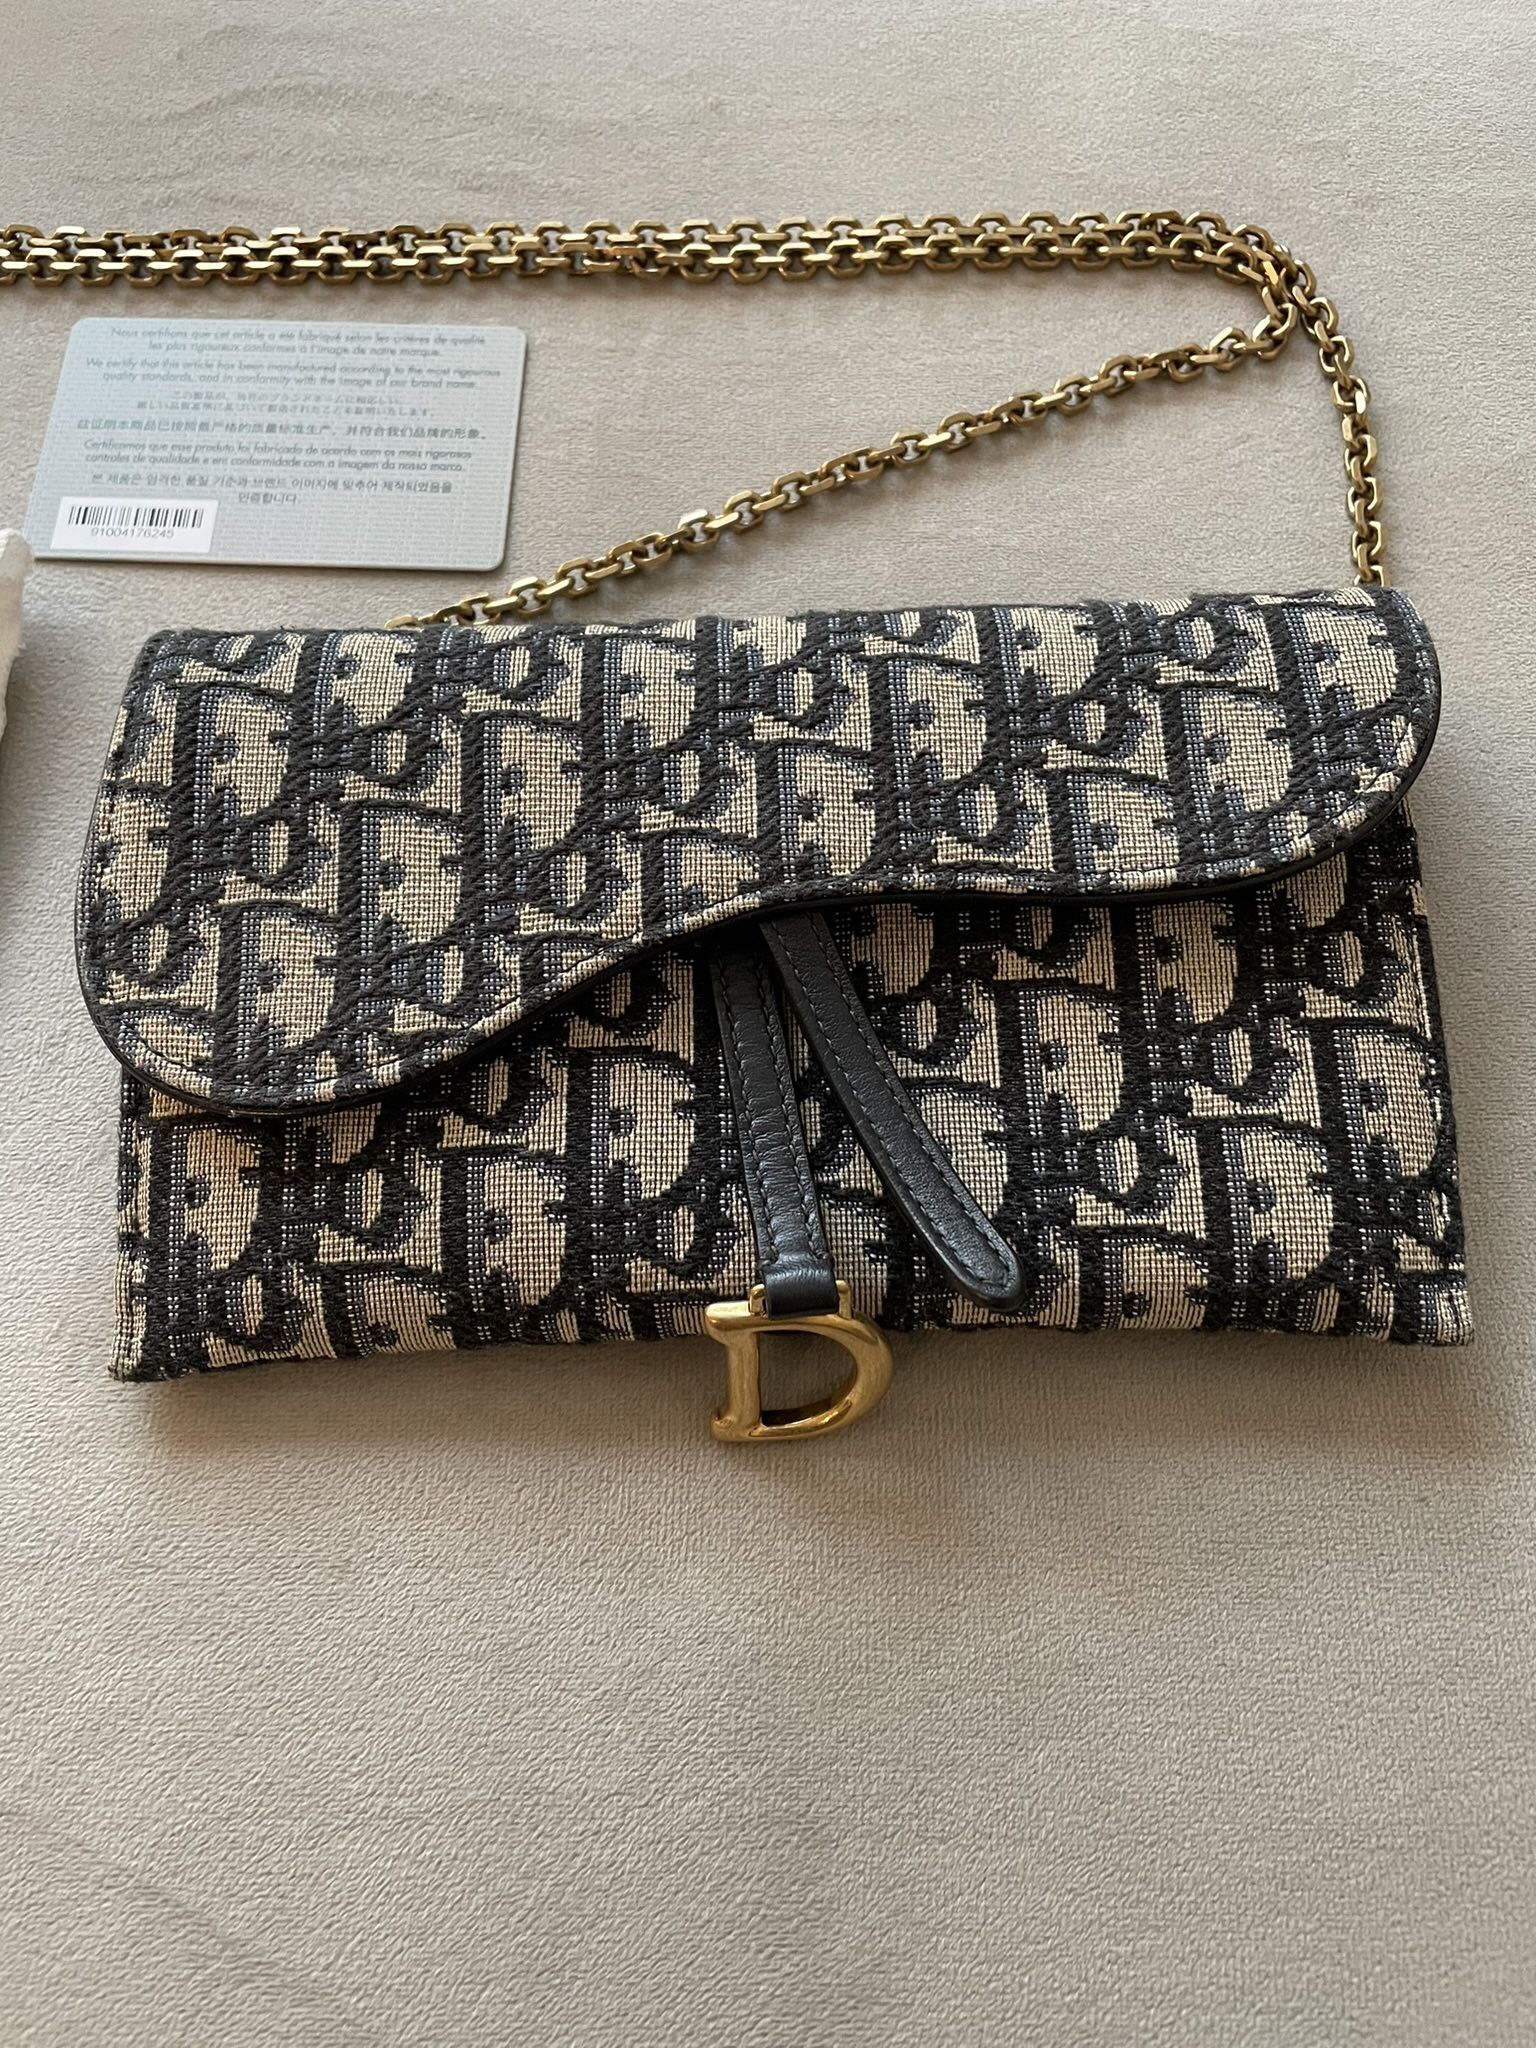 Dior Oblique Saddle Wallet on Chain, Have RECEIPTS